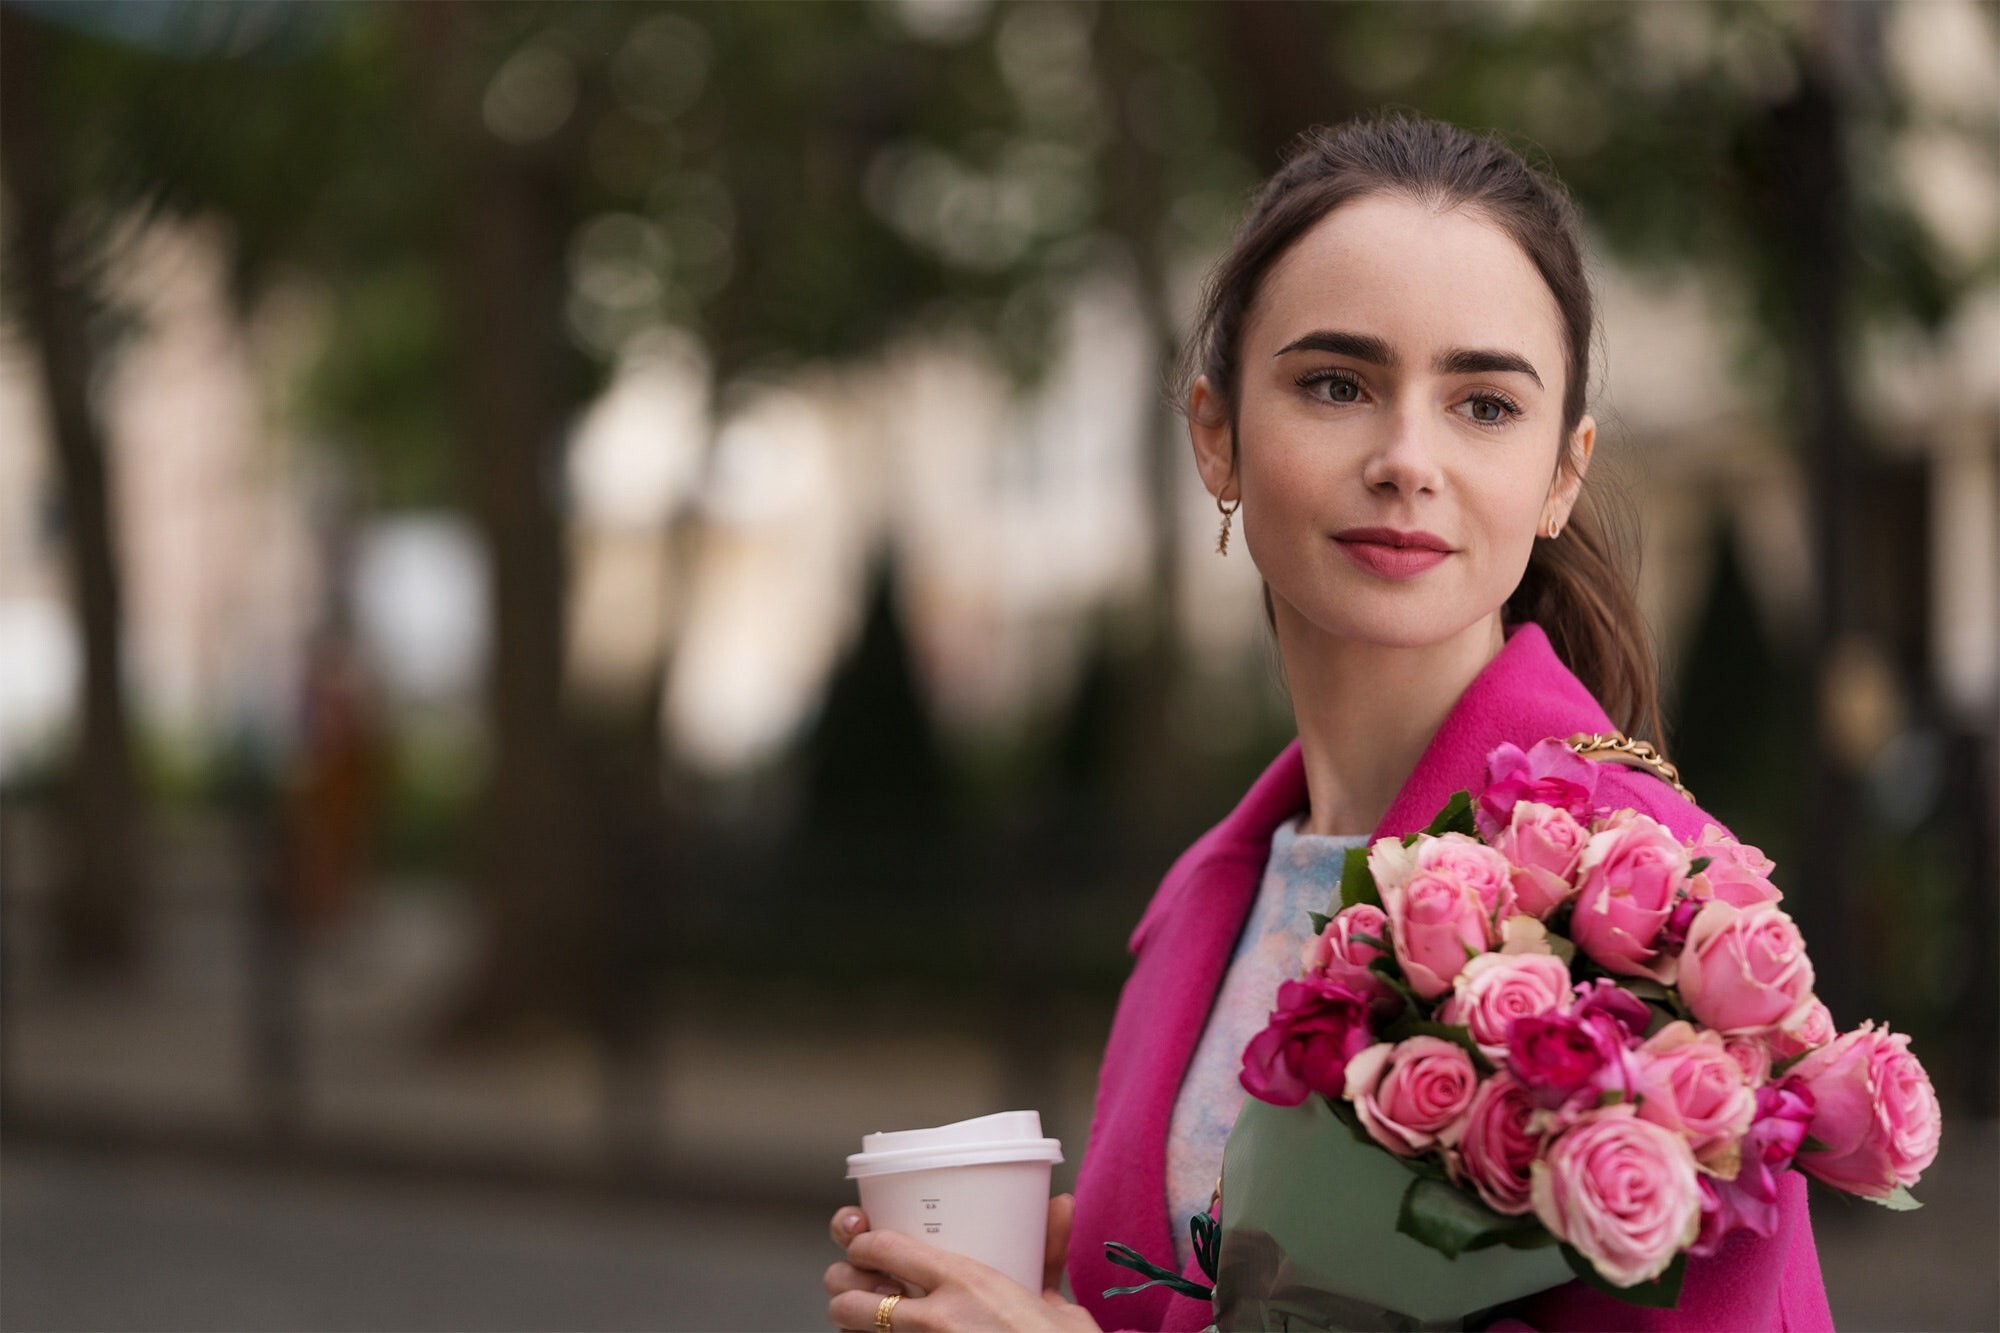 New Lily Collins 2020 Wallpapers